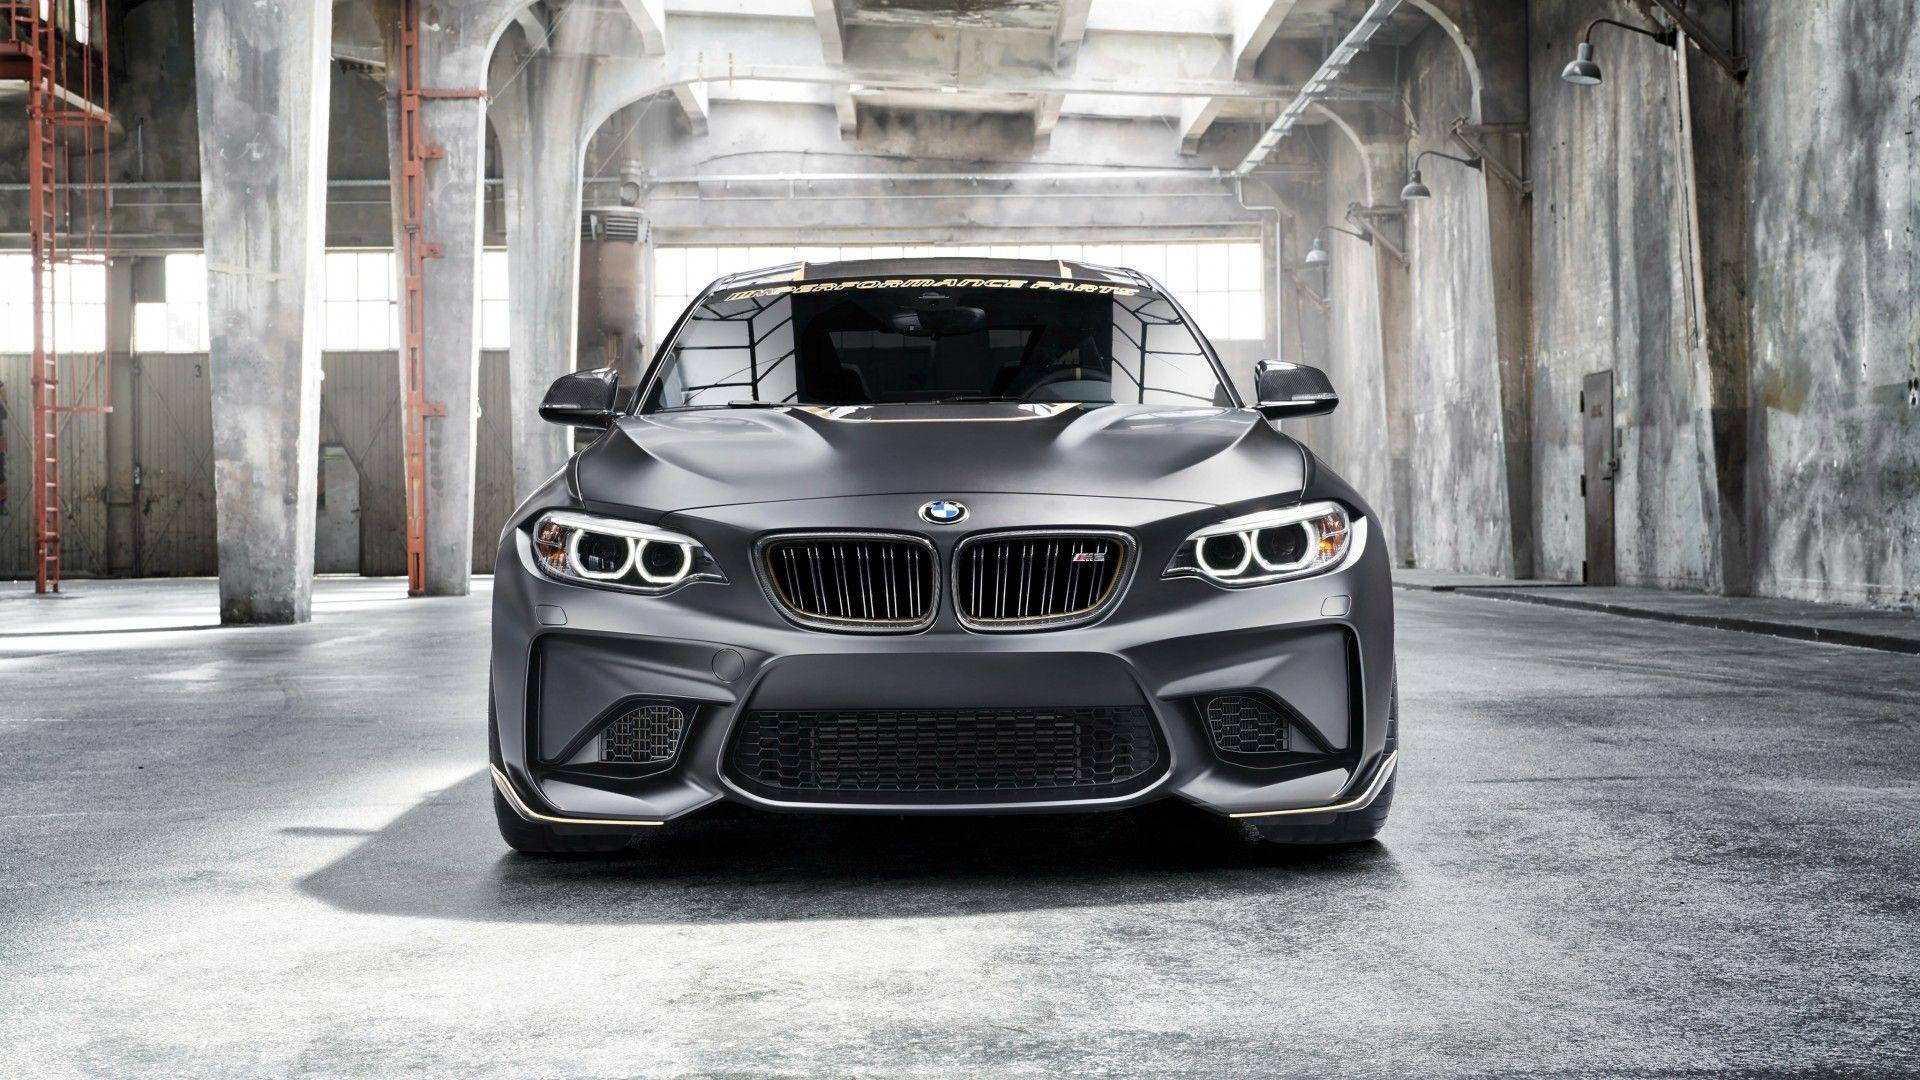 Download 1920x1080 Bmw M Front View, Luxury Cars, Silver